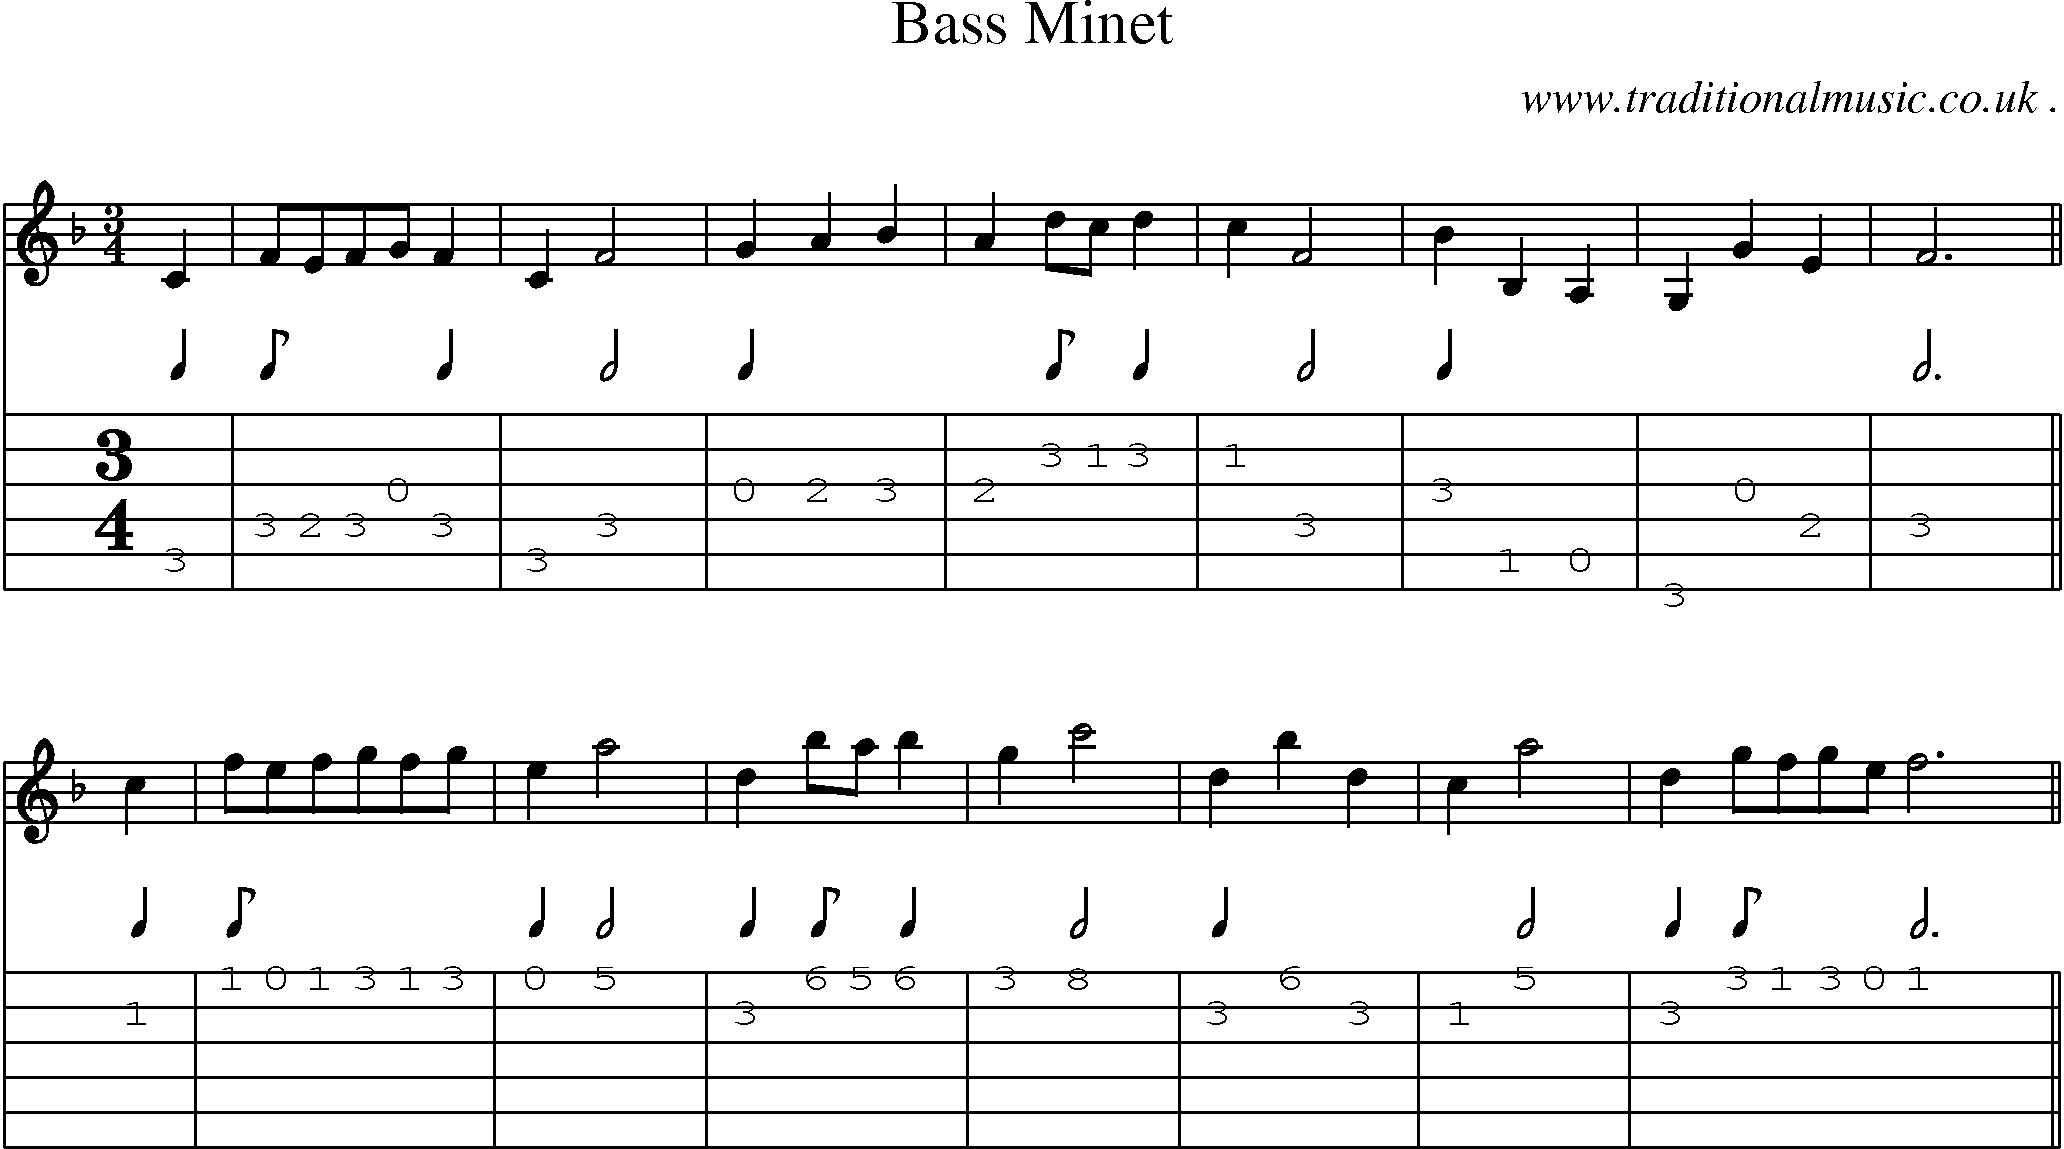 Sheet-Music and Guitar Tabs for Bass Minet